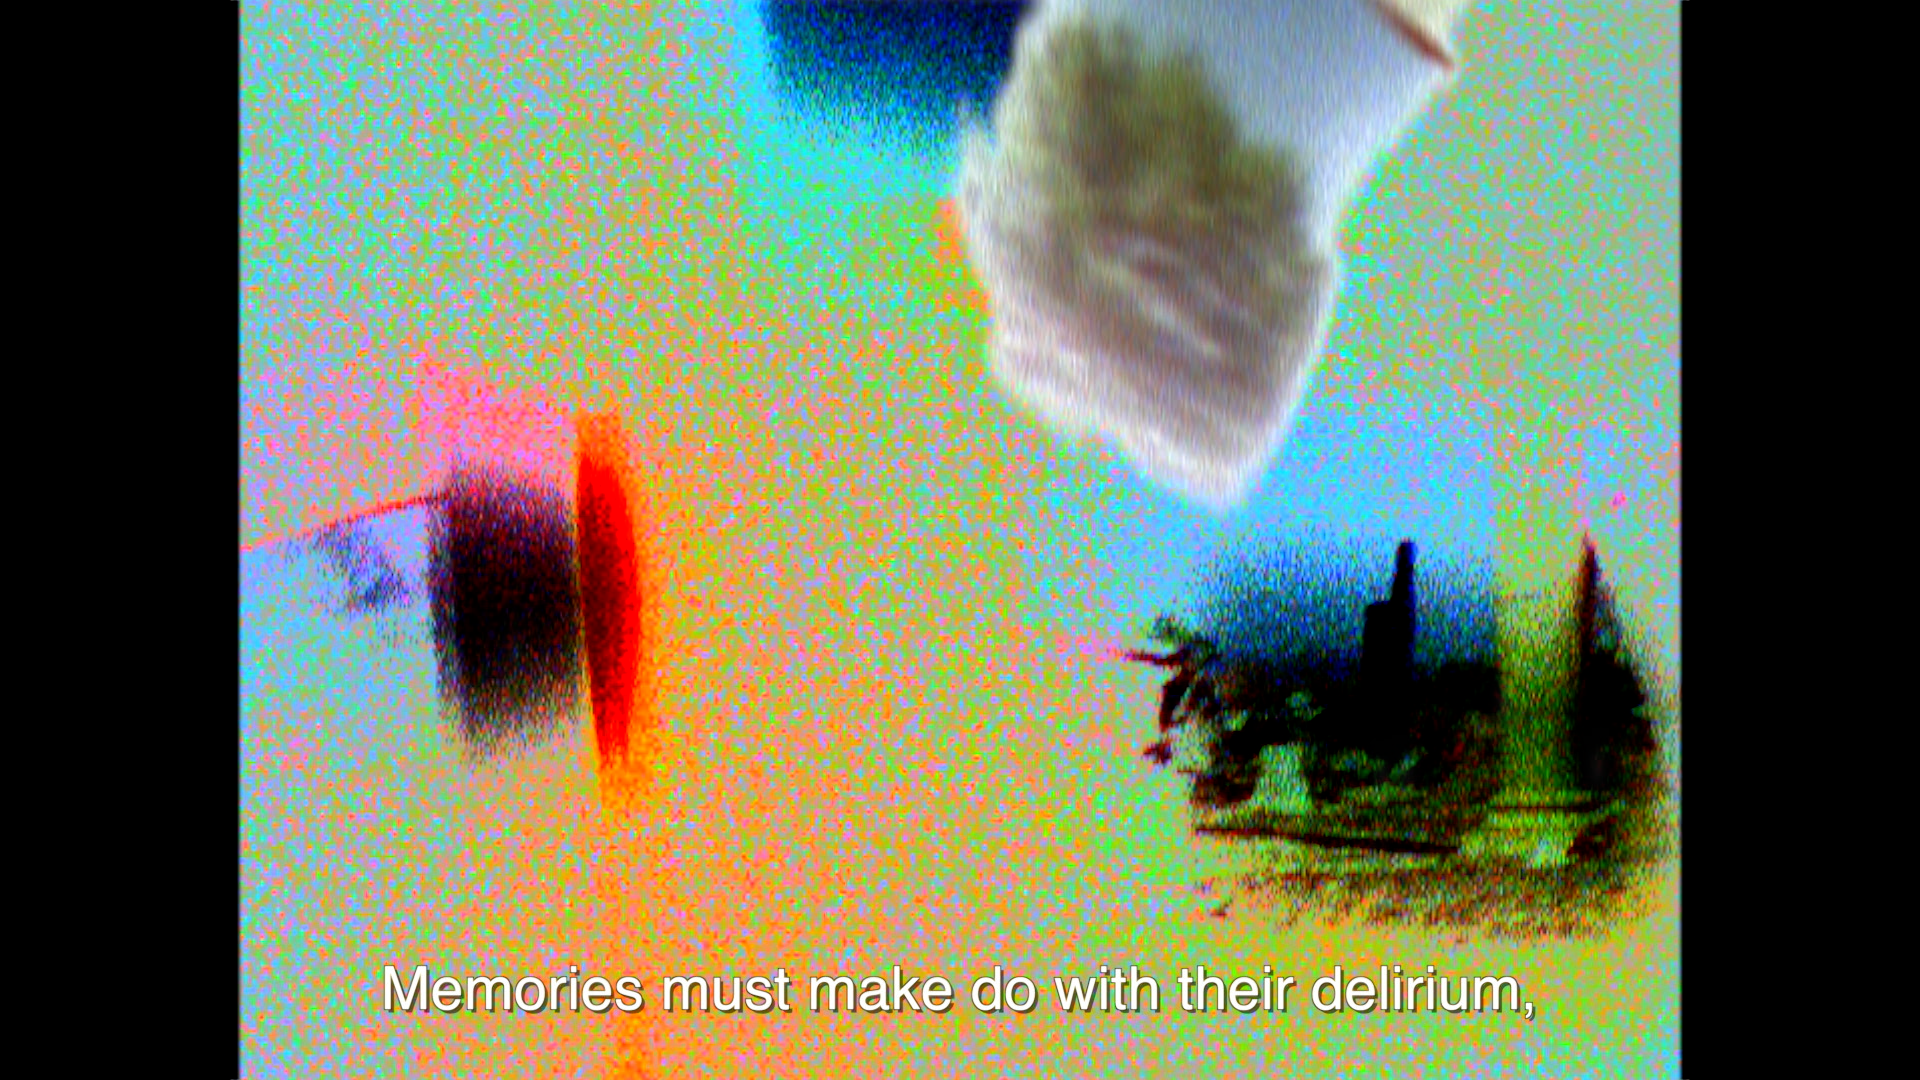 Pixelated multi-color image with text "Memories must make do with their delirium," written at the bottom.